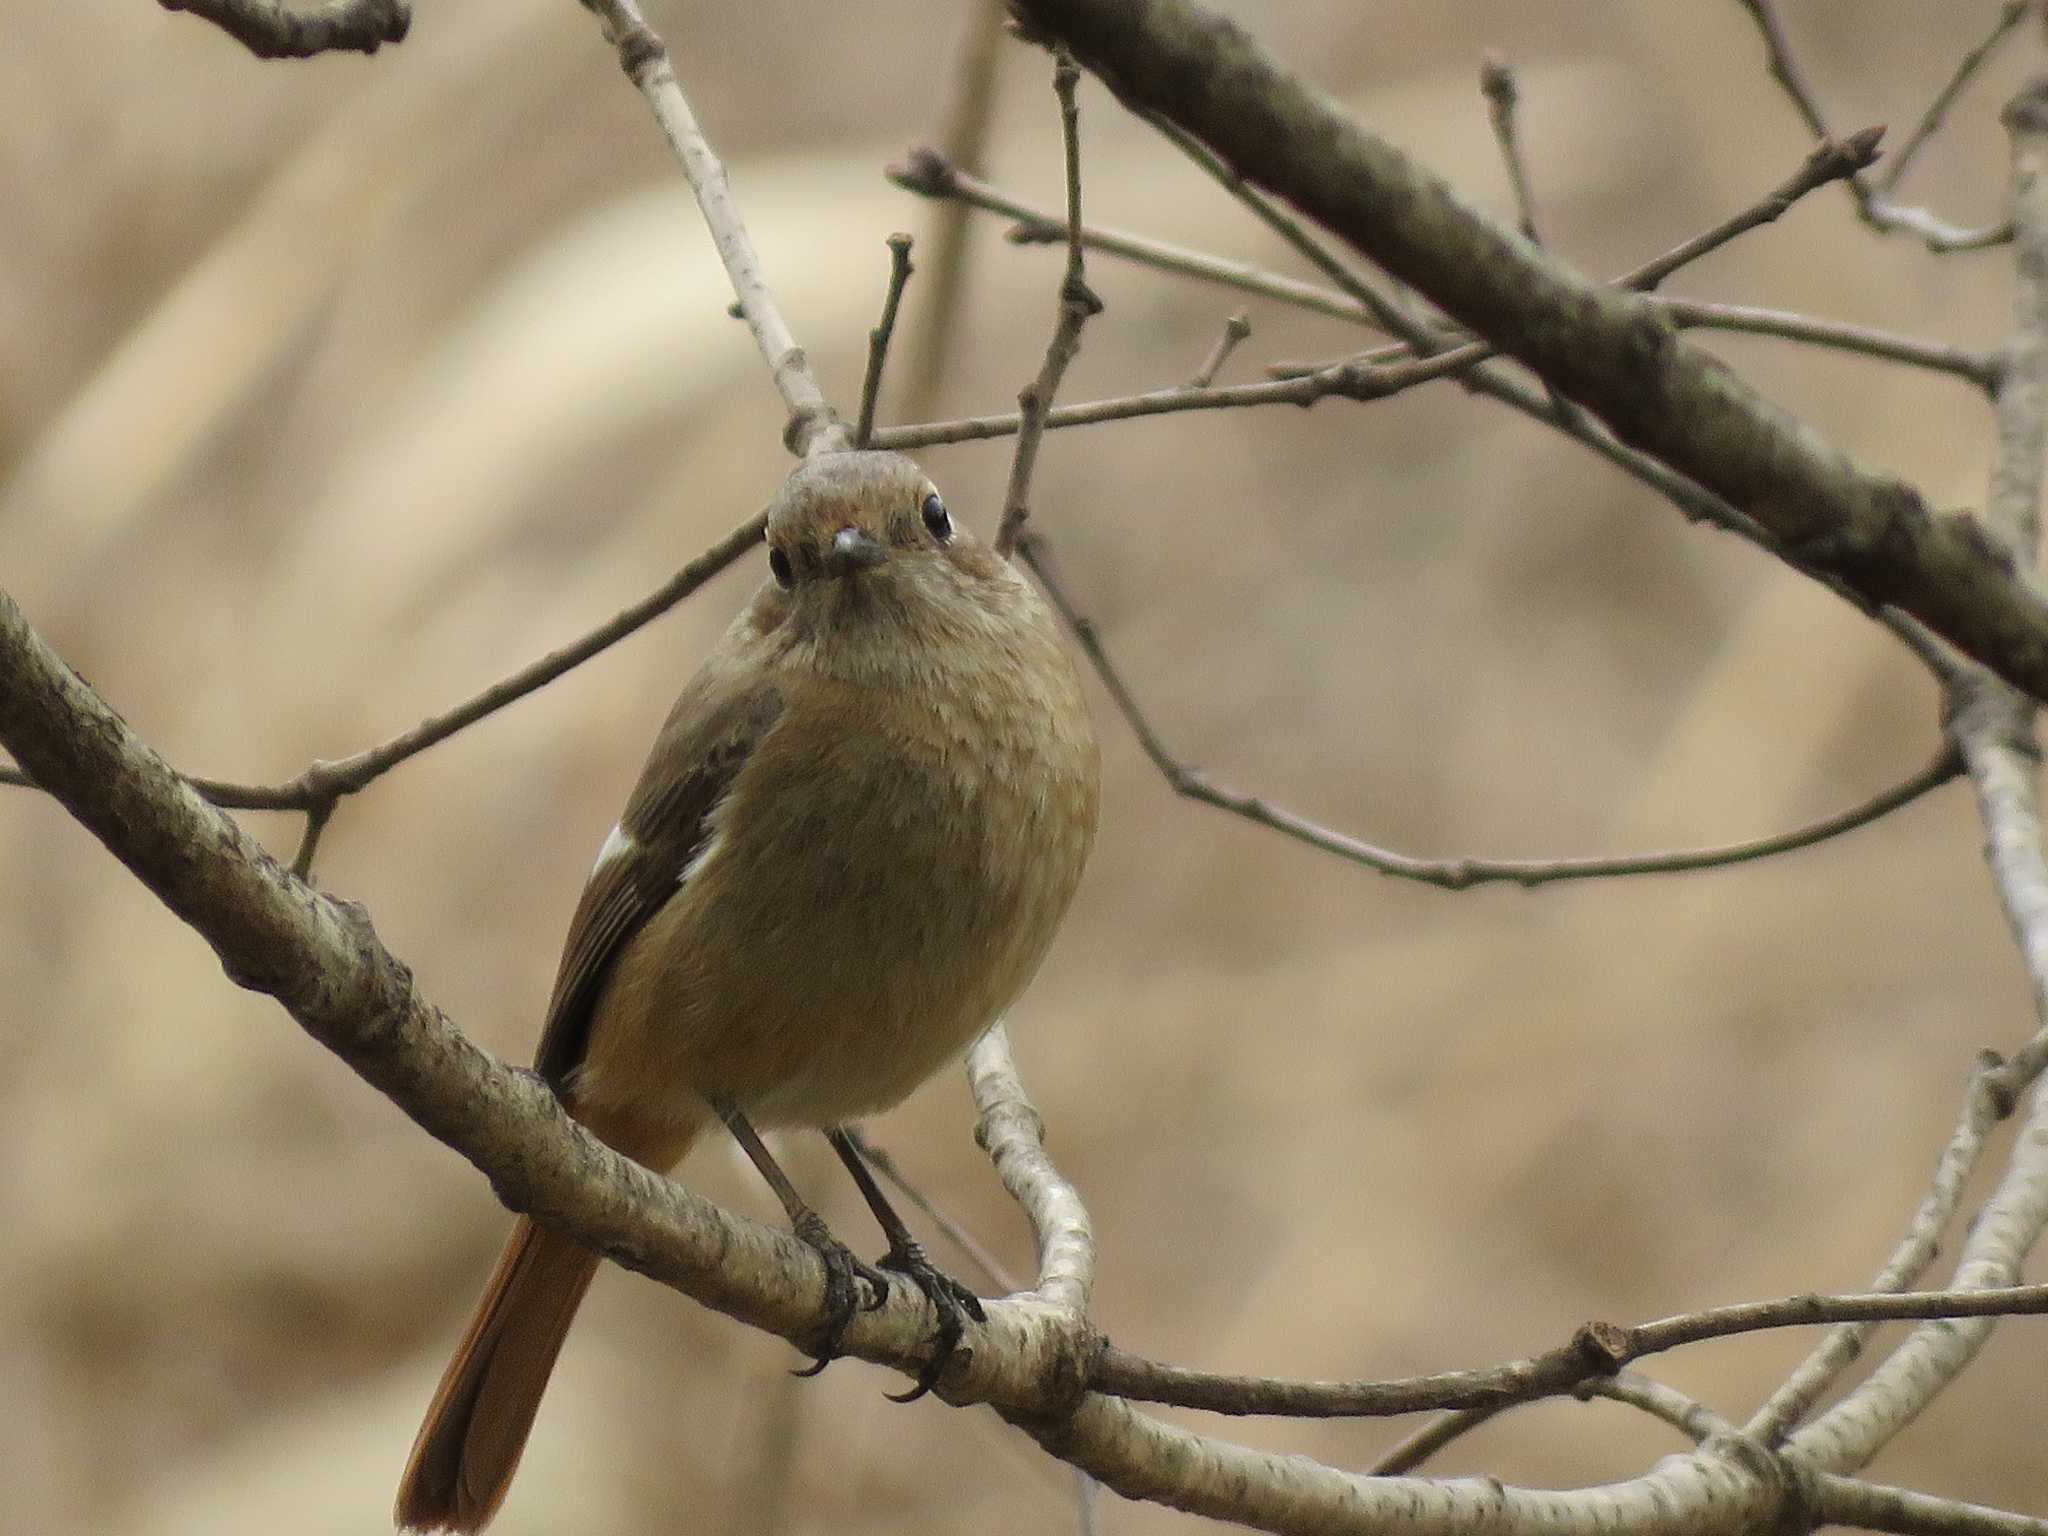 Photo of Daurian Redstart at Kitamoto Nature Observation Park by ベーコンと苺ジャム